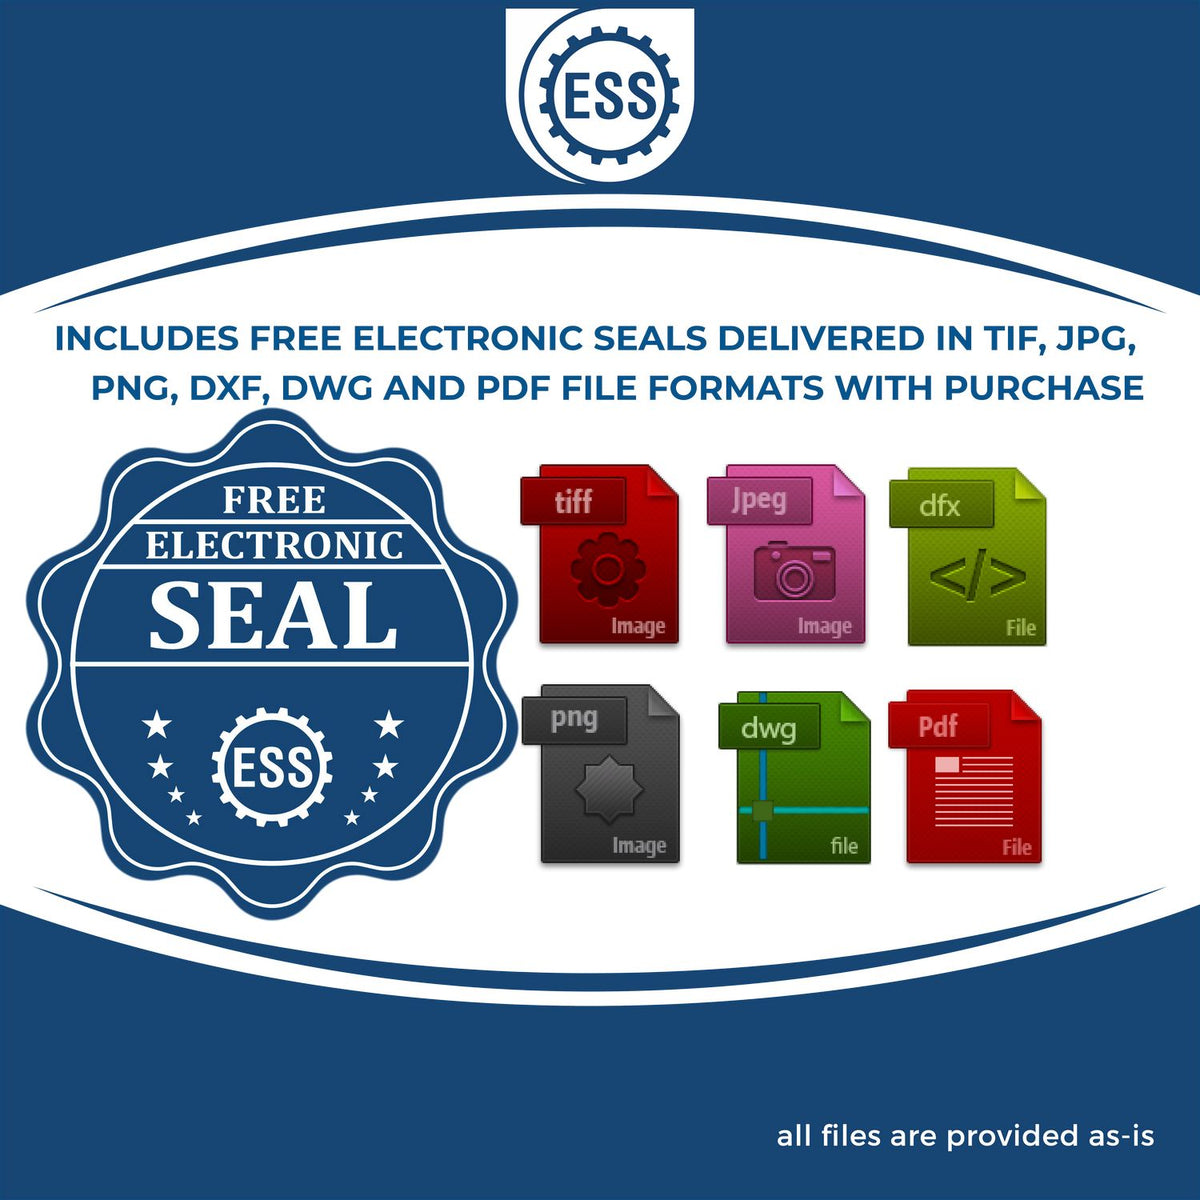 An infographic for the free electronic seal for the Heavy Duty Cast Iron Colorado Geologist Seal Embosser illustrating the different file type icons such as DXF, DWG, TIF, JPG and PNG.